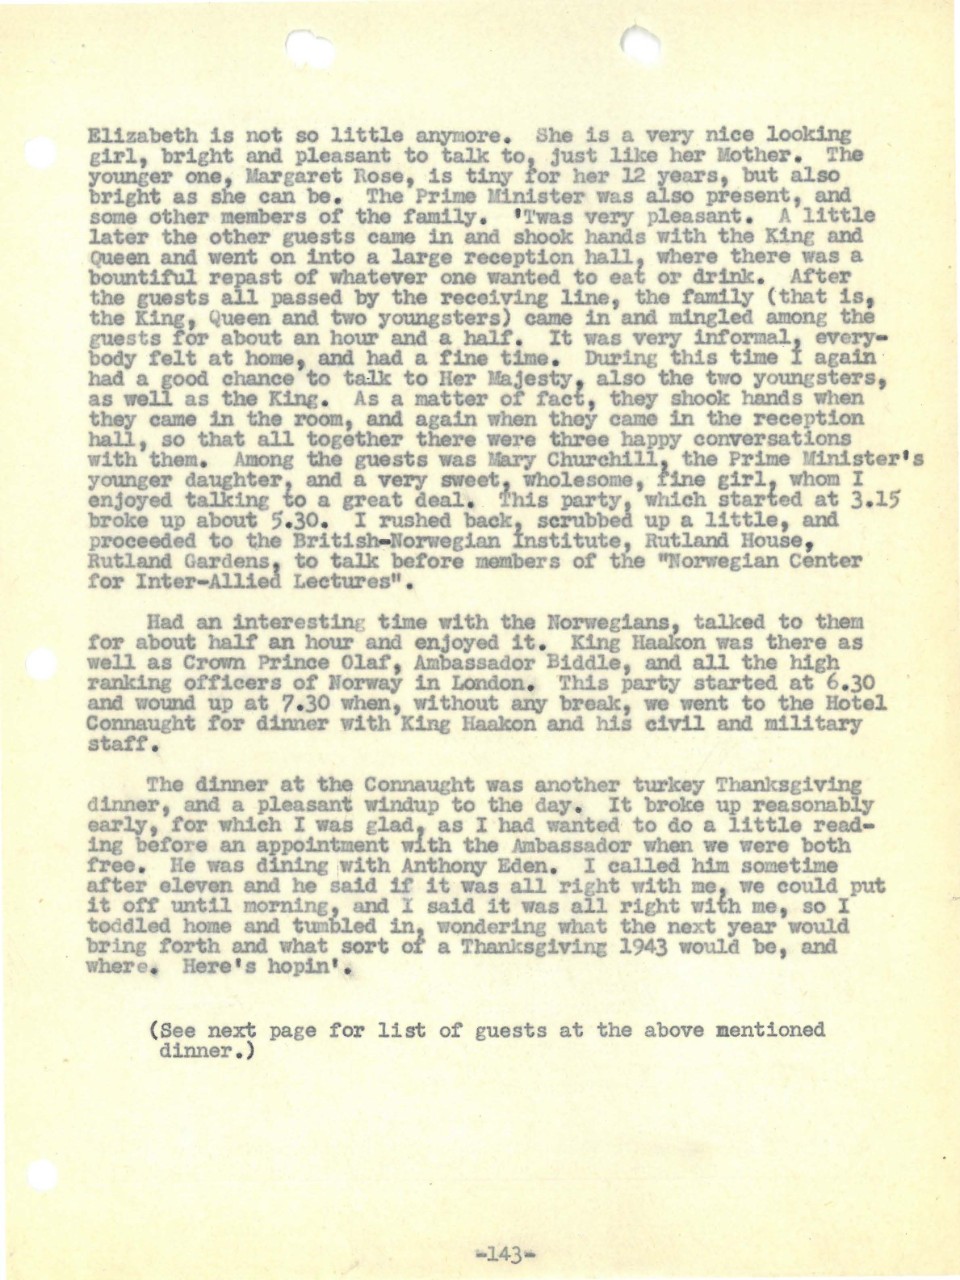 Admiral Stark's Diary Entry for Thanksgiving Day 1942, page 2